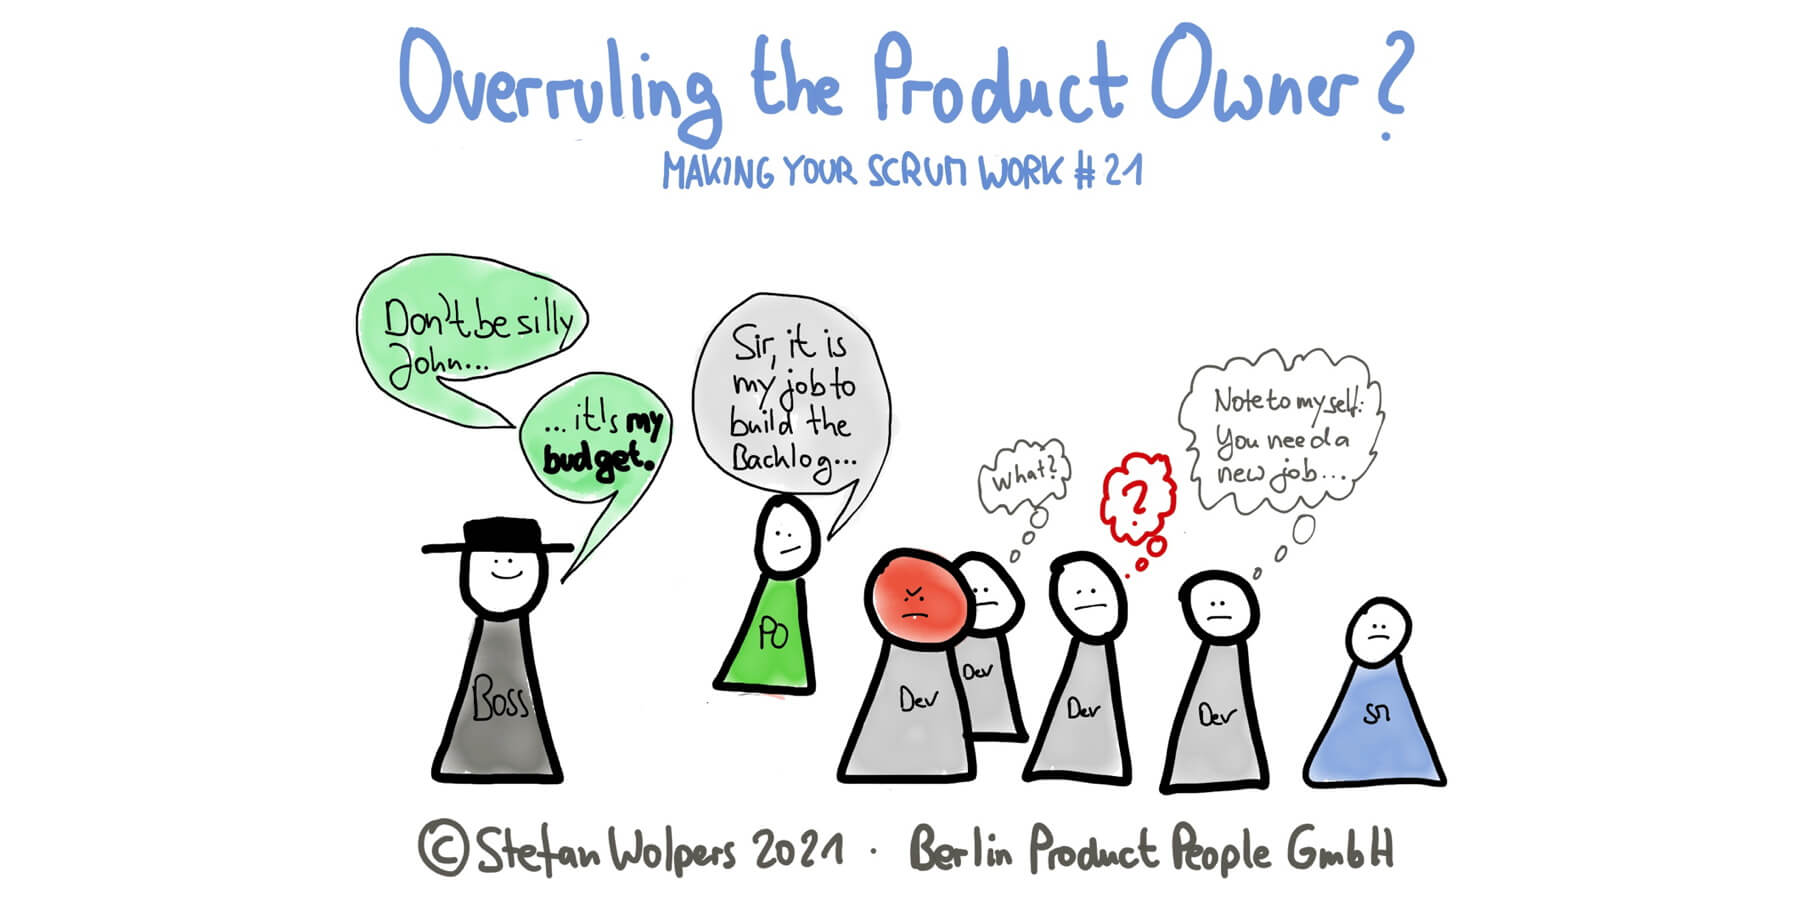 Overruling the Product Owner? — Making Your Scrum Work #21 — Berlin Product People GmbH